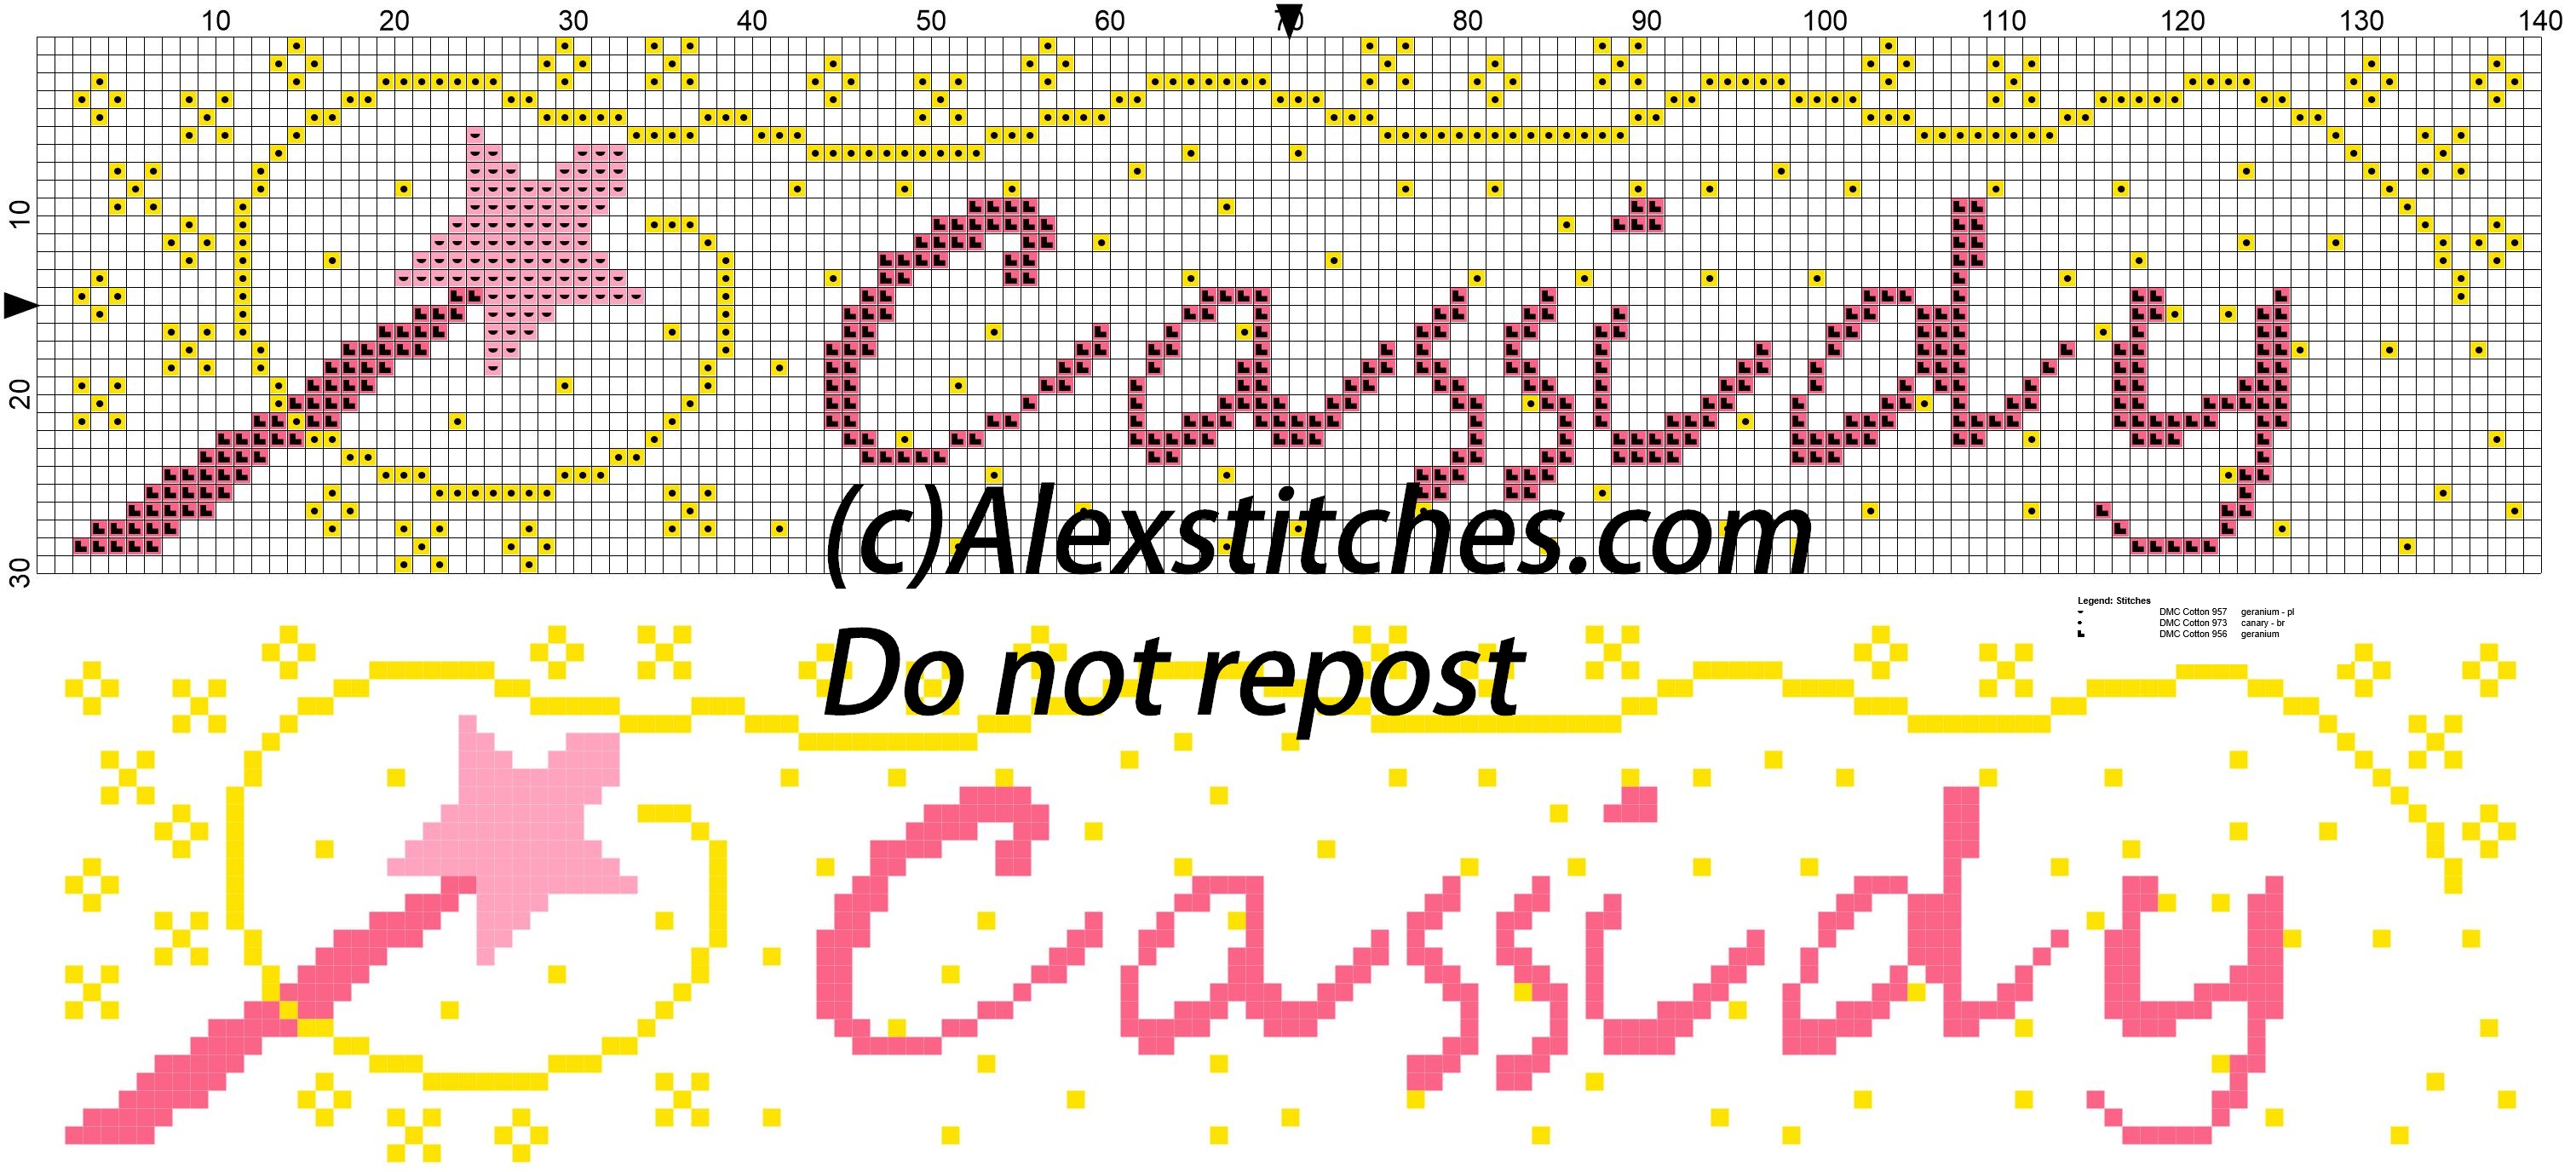 Cassidy name with magic wand